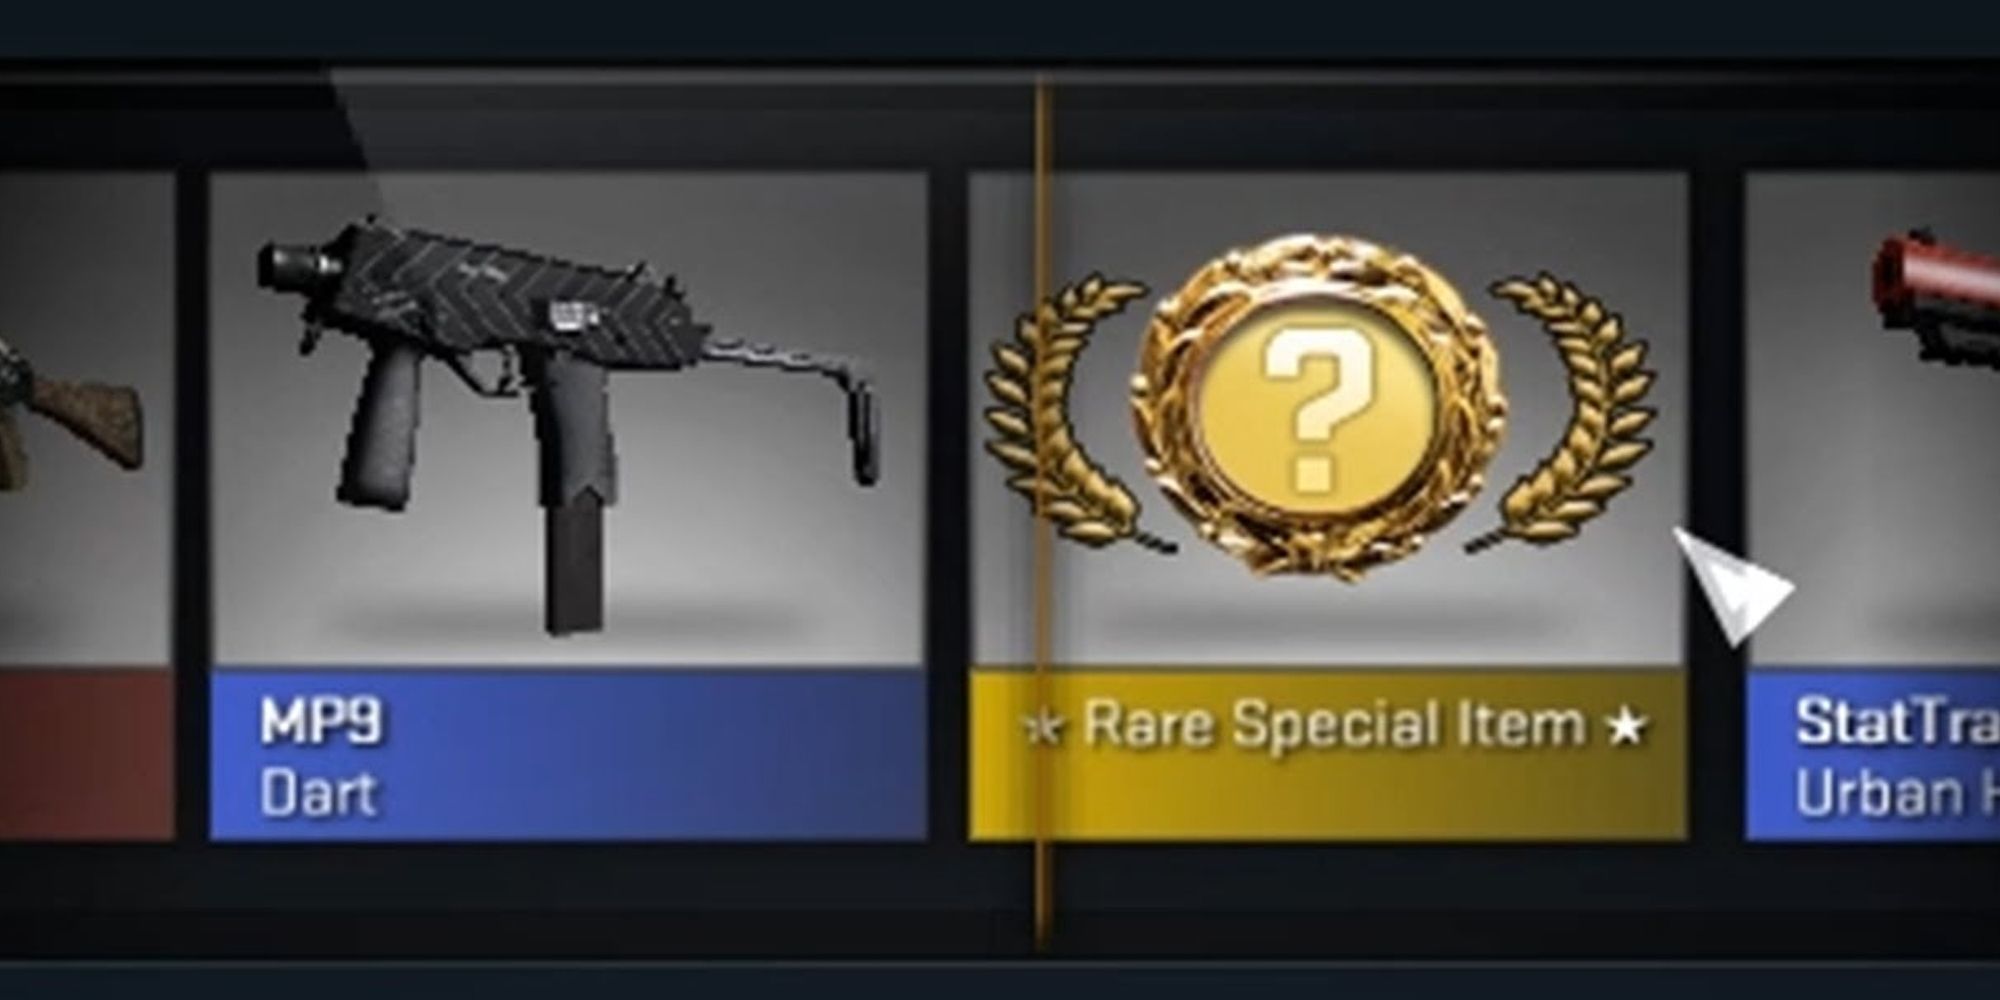 Opening a case in Counter-Strike: Global Offensive and landing on the Rare Special Item